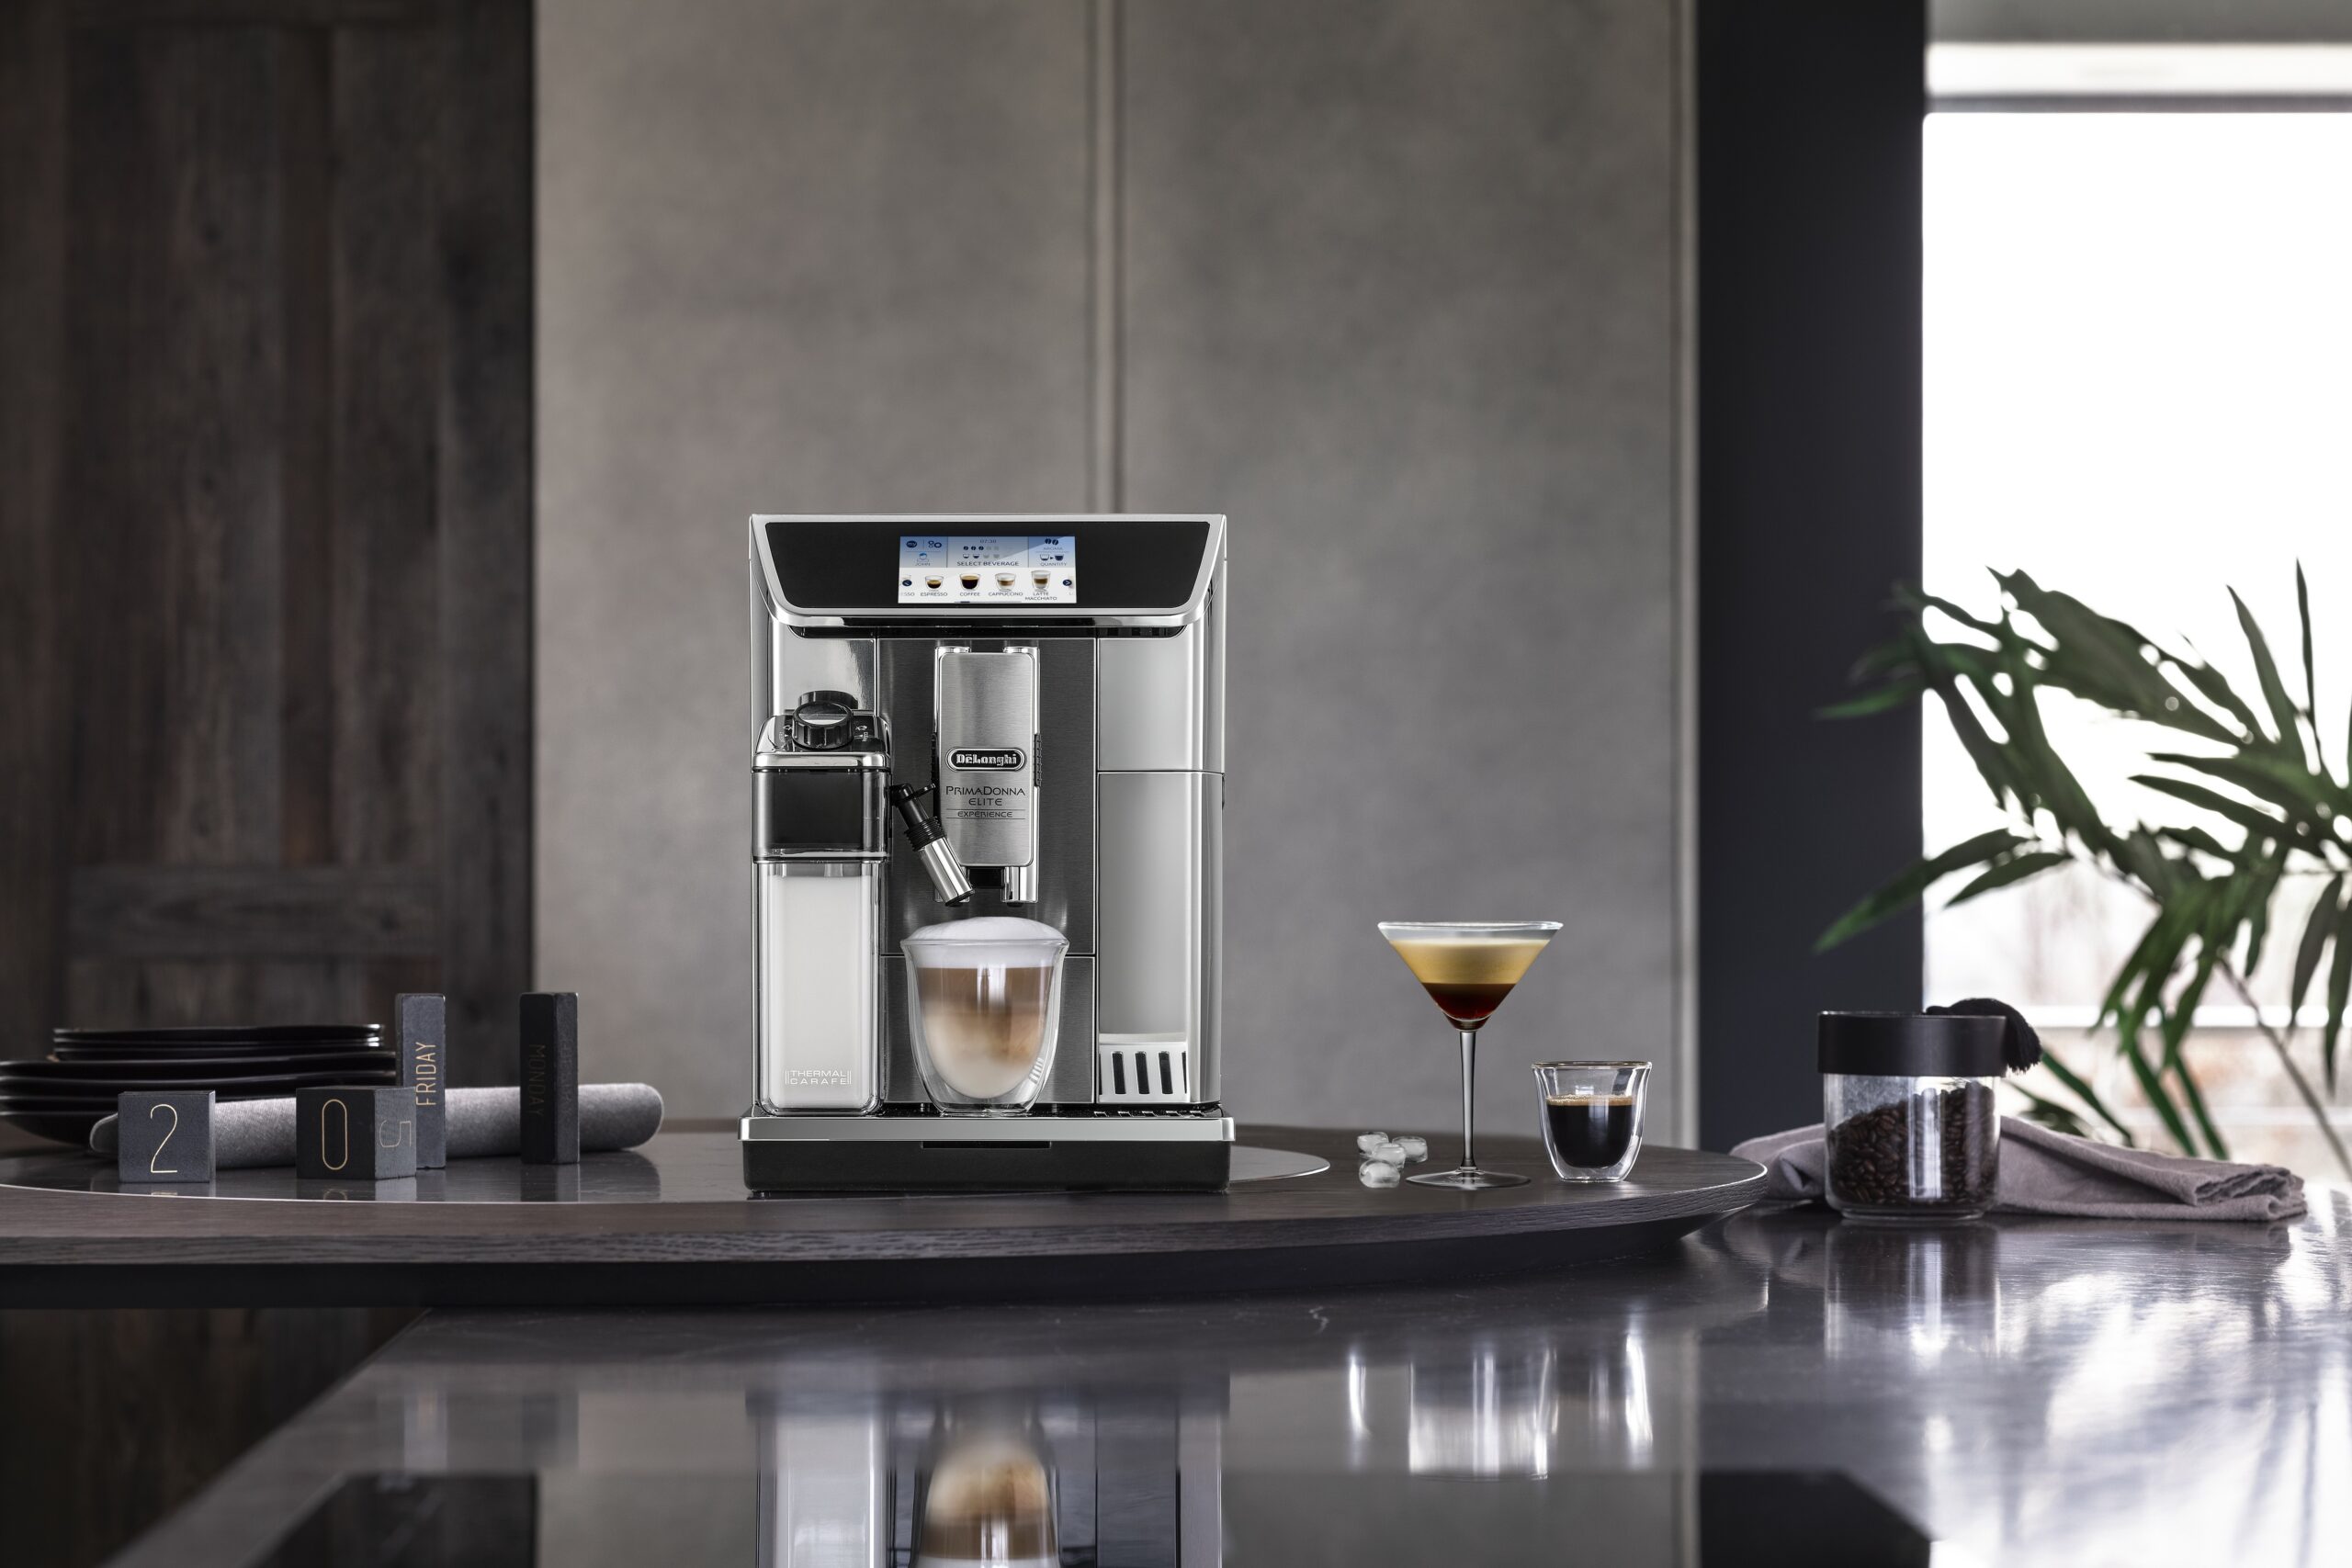 Delonghi PrimaDonna Elite Fully Automated Coffee Machine Scaled, Design Authority